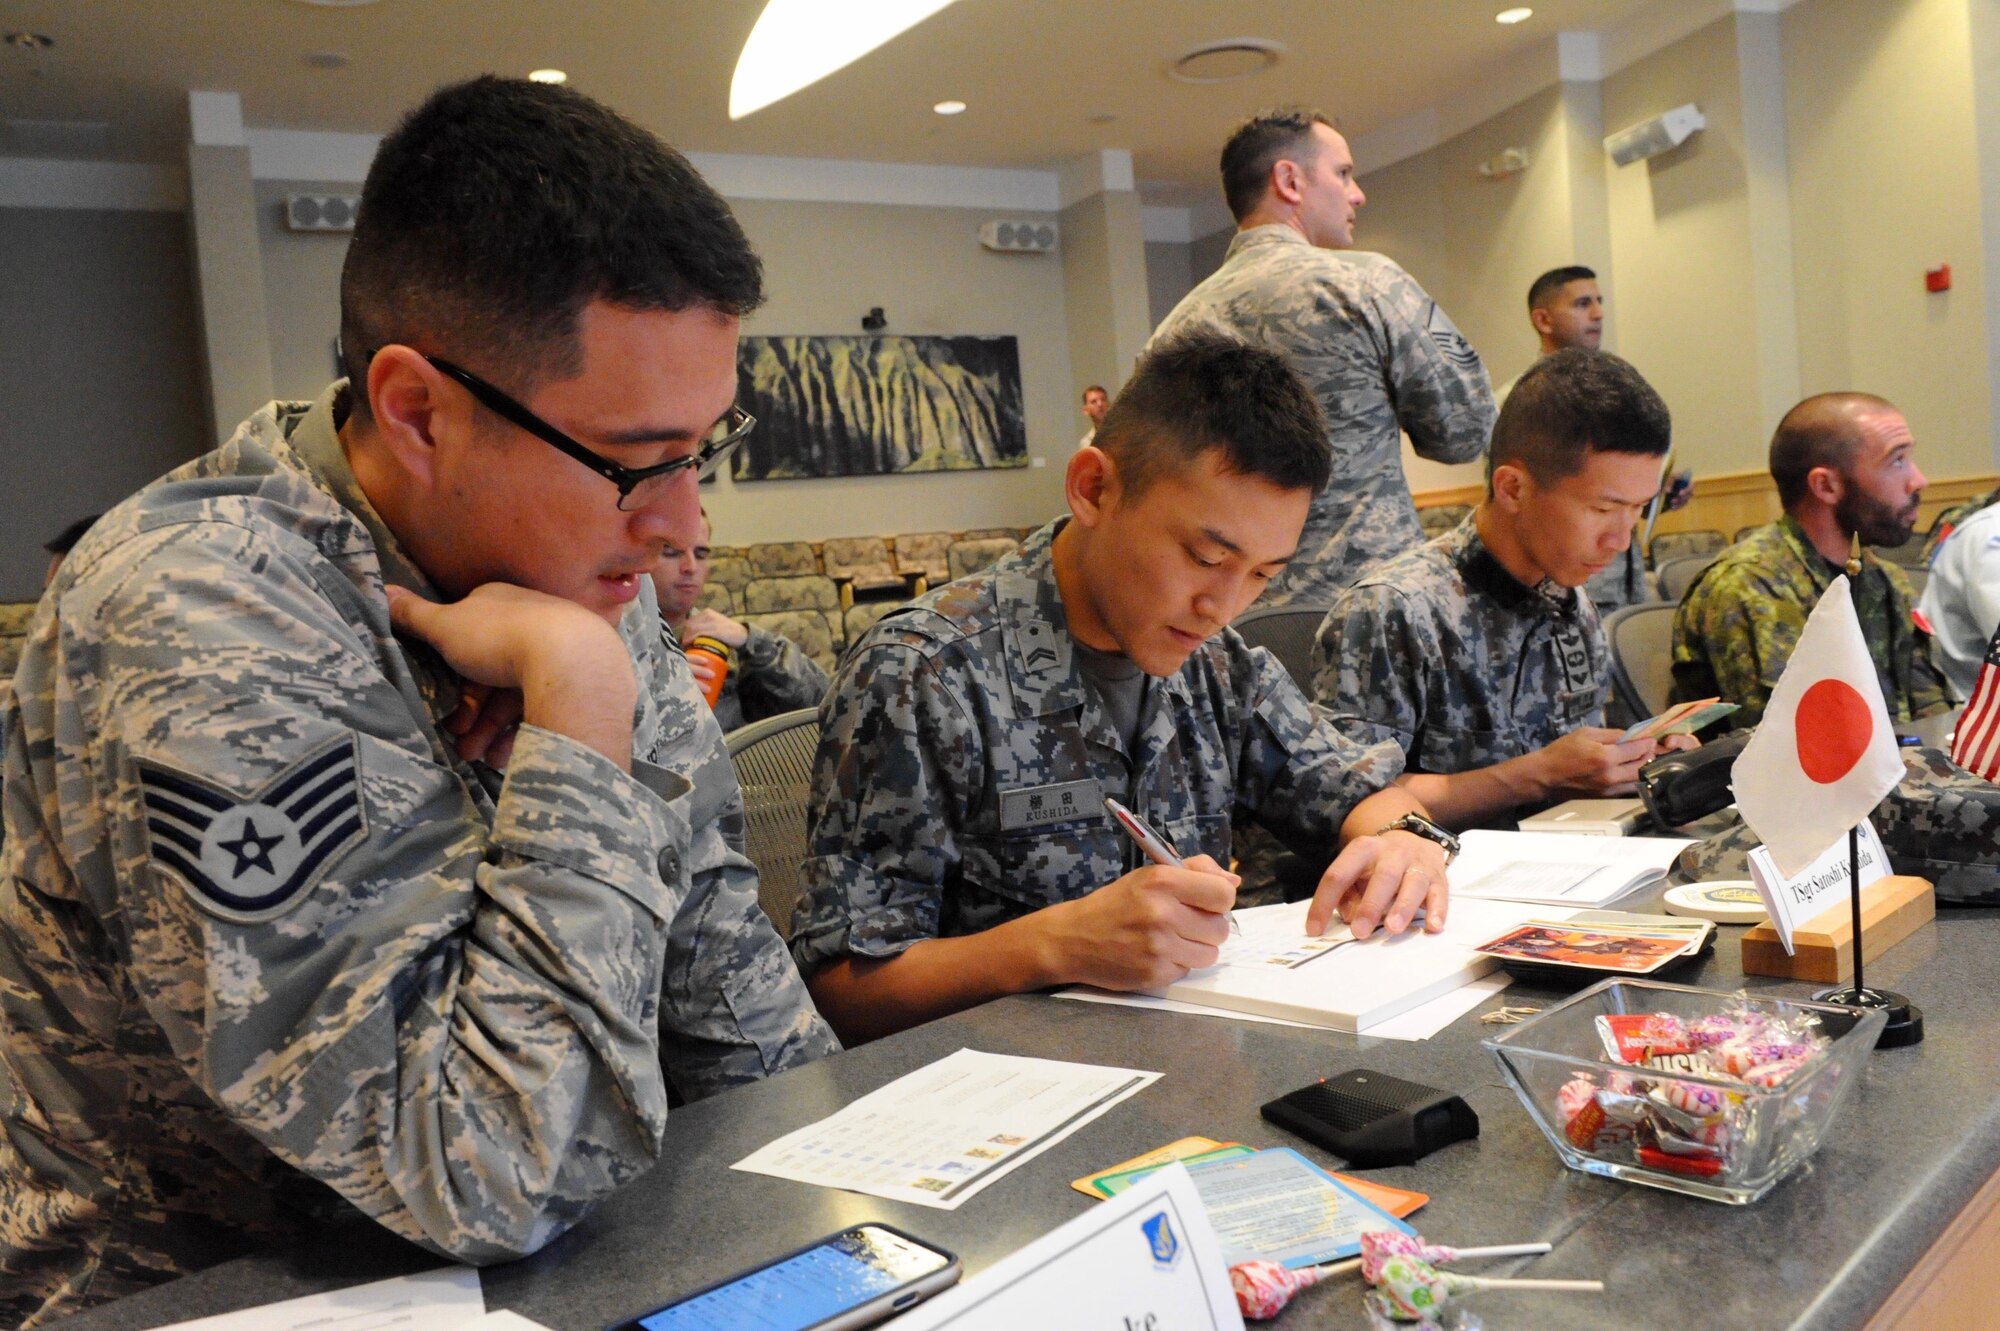 U.S. Air Force Staff Sgt. Ryuta Riecke, left, a linguist assigned to the 8th Intelligence Squadron at Hickam Air Force Base, Hawaii, translates for Japan Air Self-Defense Force Tech. Sgt. Satoshi Kushida, center, during a leadership activity at the first U.S. led, Pacific Rim Junior Enlisted Leadership Forum (JELF) at Joint Base Pearl Harbor-Hickam, Hawaii, Aug 8. 2016. The service members came together from 11 different countries to share experiences and to gain valuable insight on leadership development in order to grow as tomorrow's senior enlisted leaders.  (U.S. Air Force photo by Staff Sgt. Kamaile Chan)